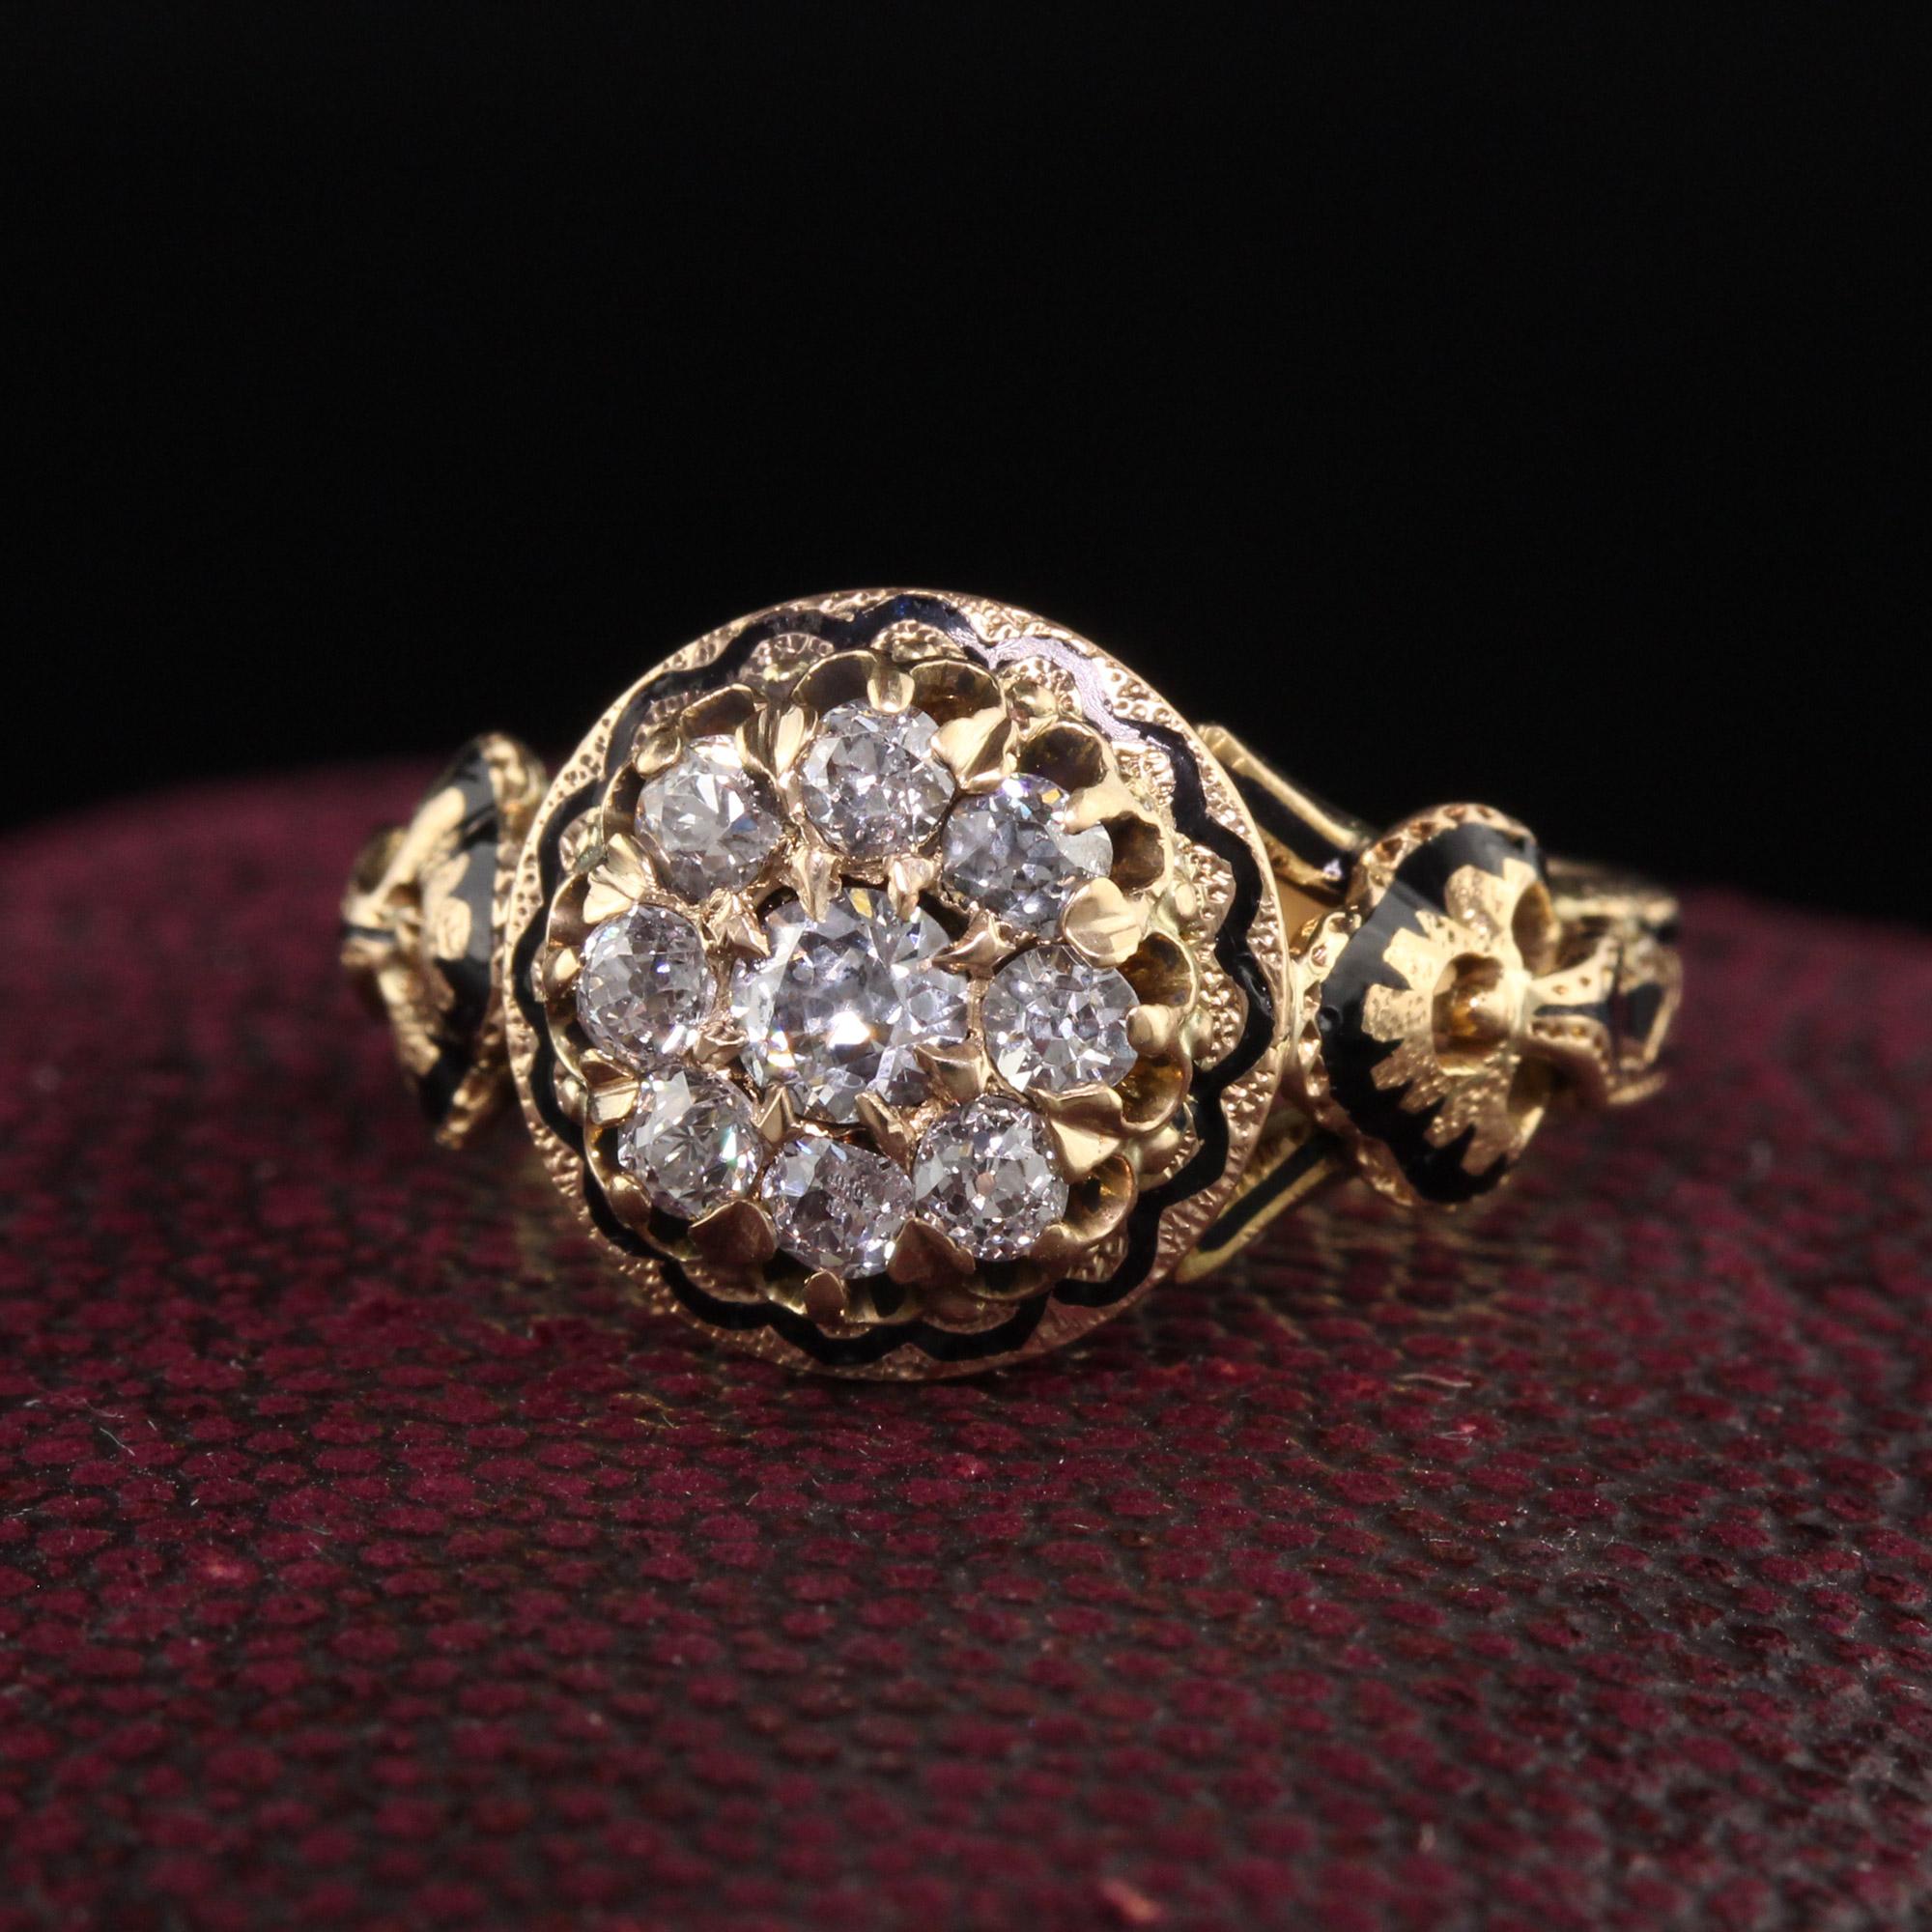 Beautiful Antique Victorian 18K Yellow Gold Old Mine Cut Diamond Enamel Cluster Ring. This amazing ring is crafted in 18k yellow gold. There are old mine cut diamond on top of a gorgeous enamel Victorian mounting.

Item #R1243

Metal: 18K Yellow